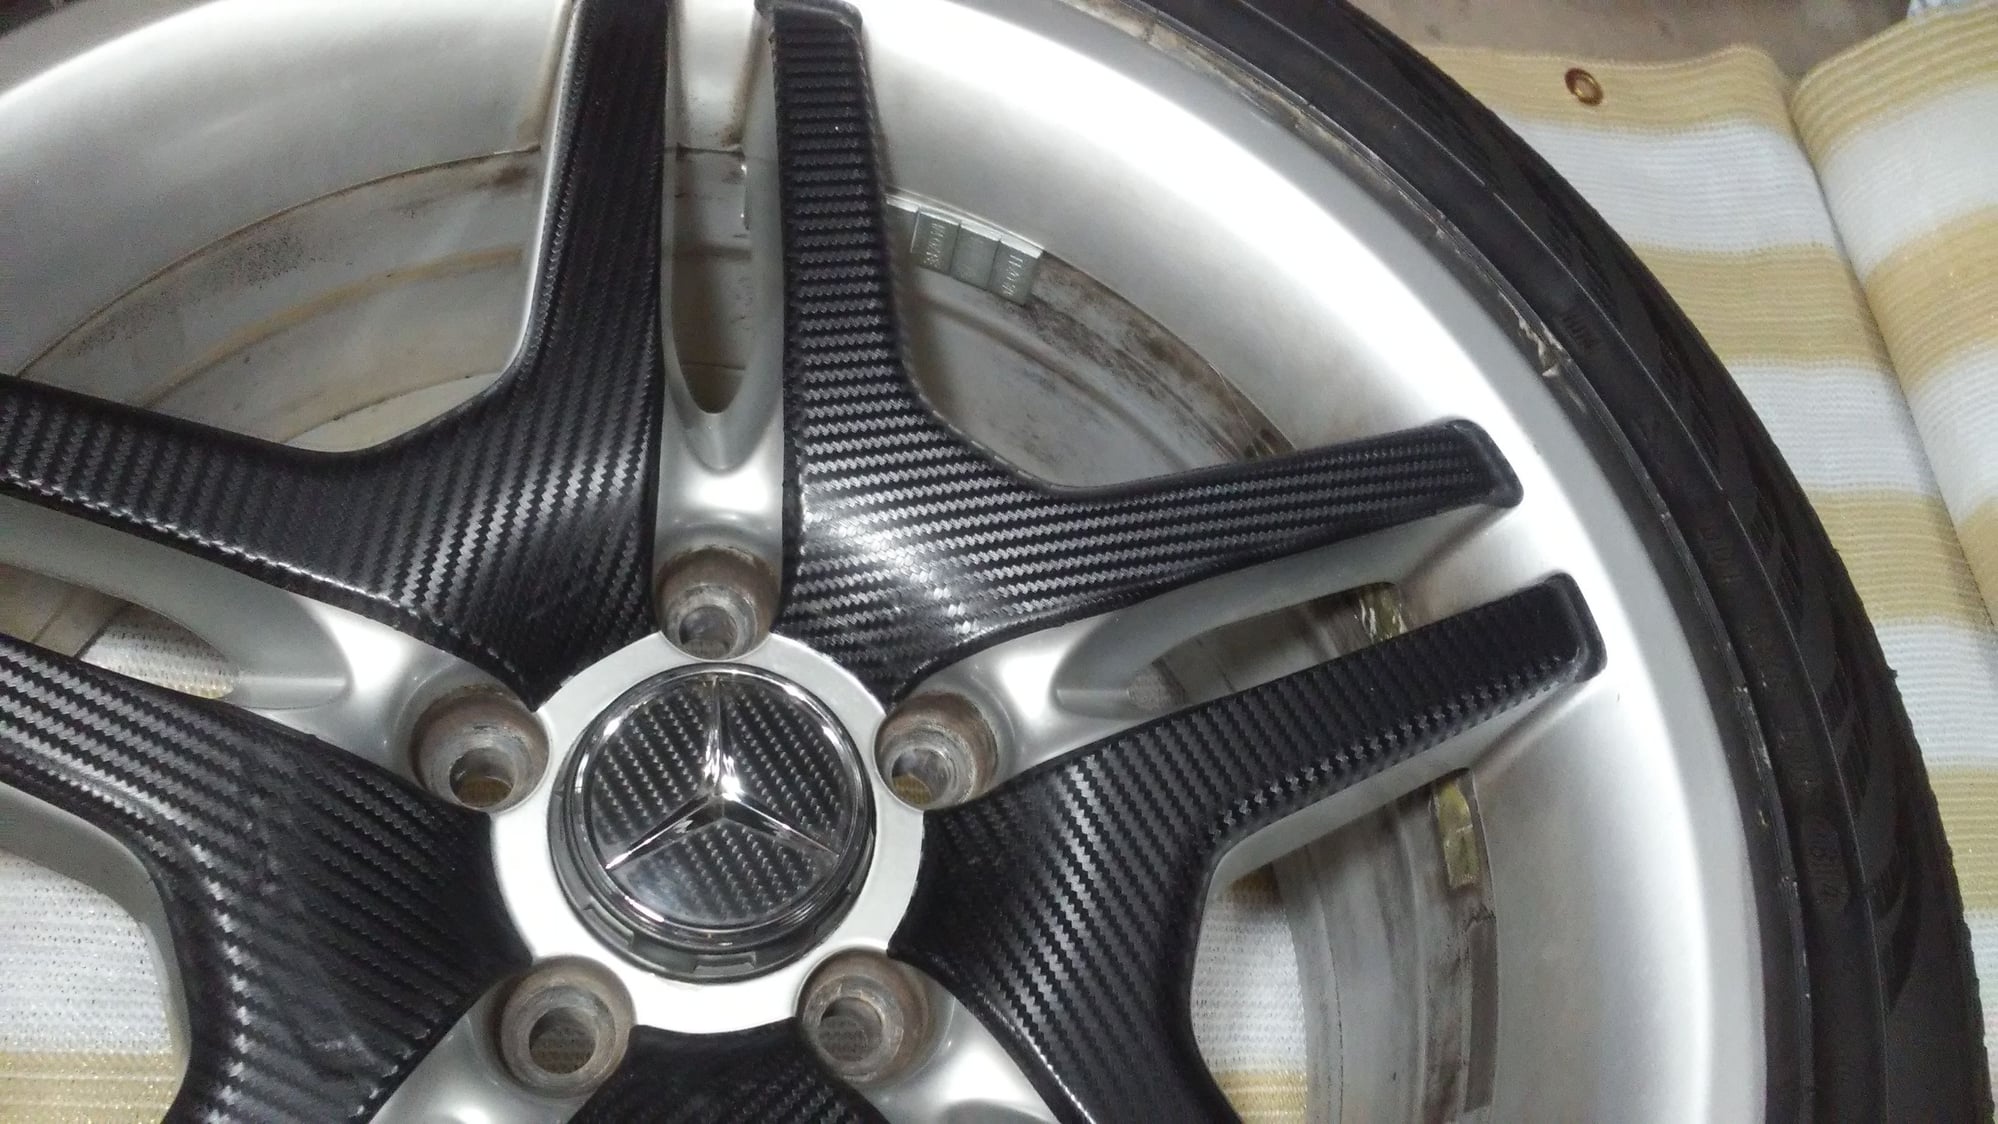 Wheels and Tires/Axles - CARBON FIBER-AMG 18" Double Spoke Wheels with 70-90% Tires - Used - Mesa, AZ 85215, United States